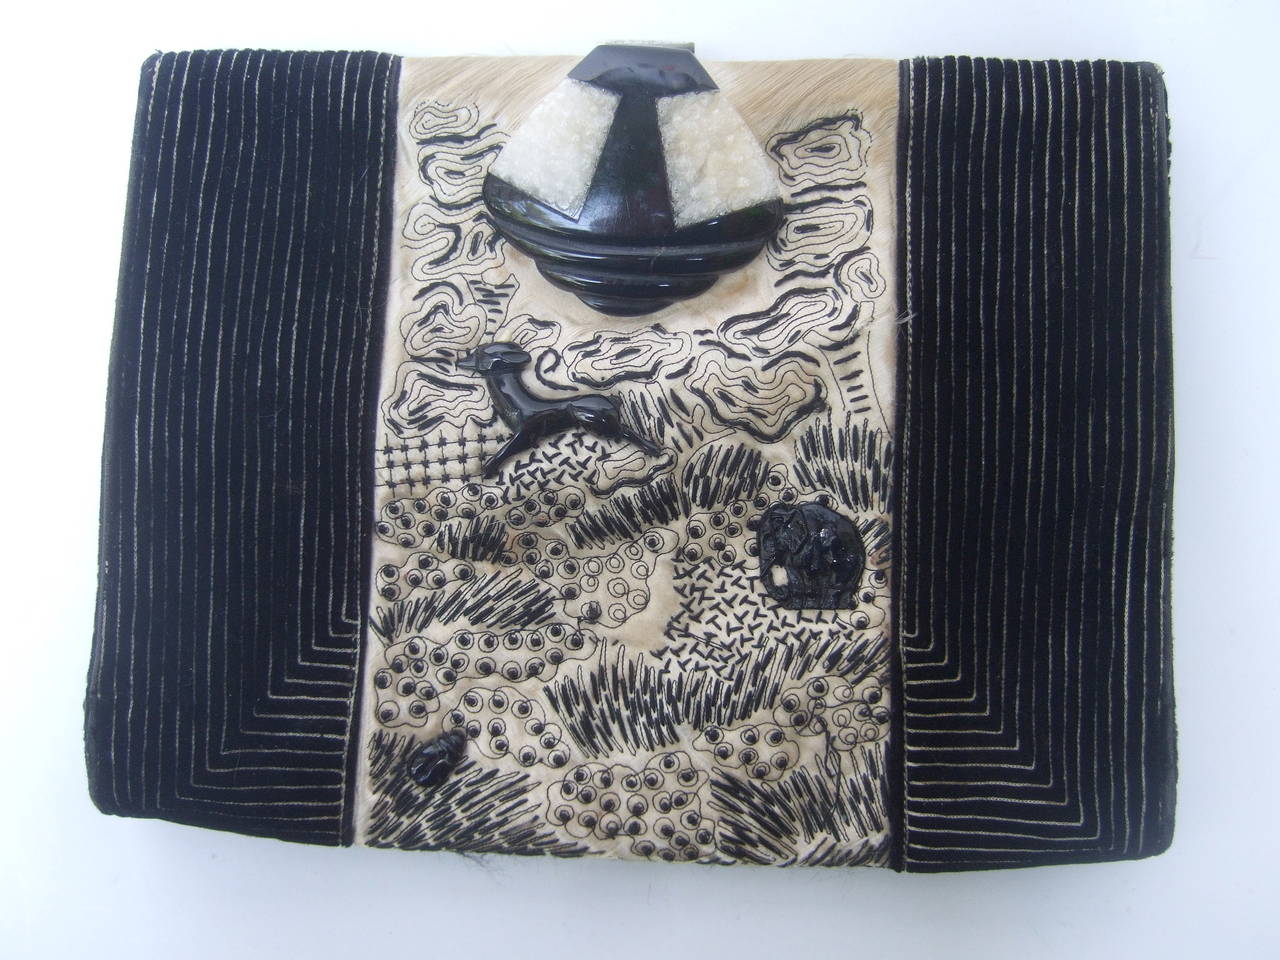 1920s Art Deco Exquisite silk embroidered clutch 
The elegant clutch is adorned with a black & white
celluloid clasp. The center panel is ivory embroidered
silk with a collection of exotic resin creates;
elephants, gazelles & a few small beetles